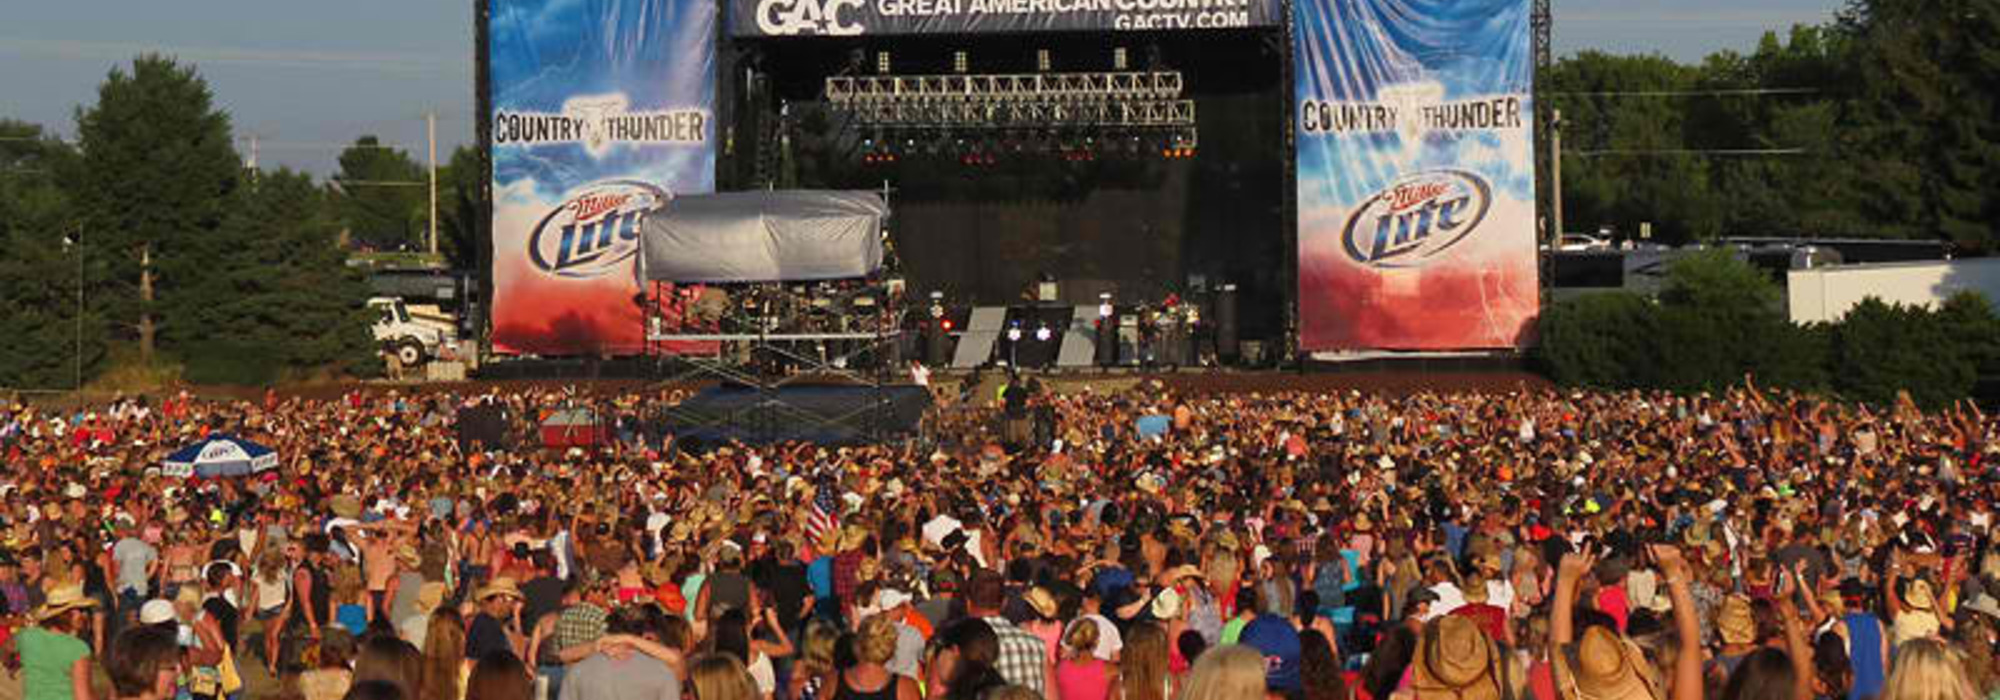 A Country Thunder live event